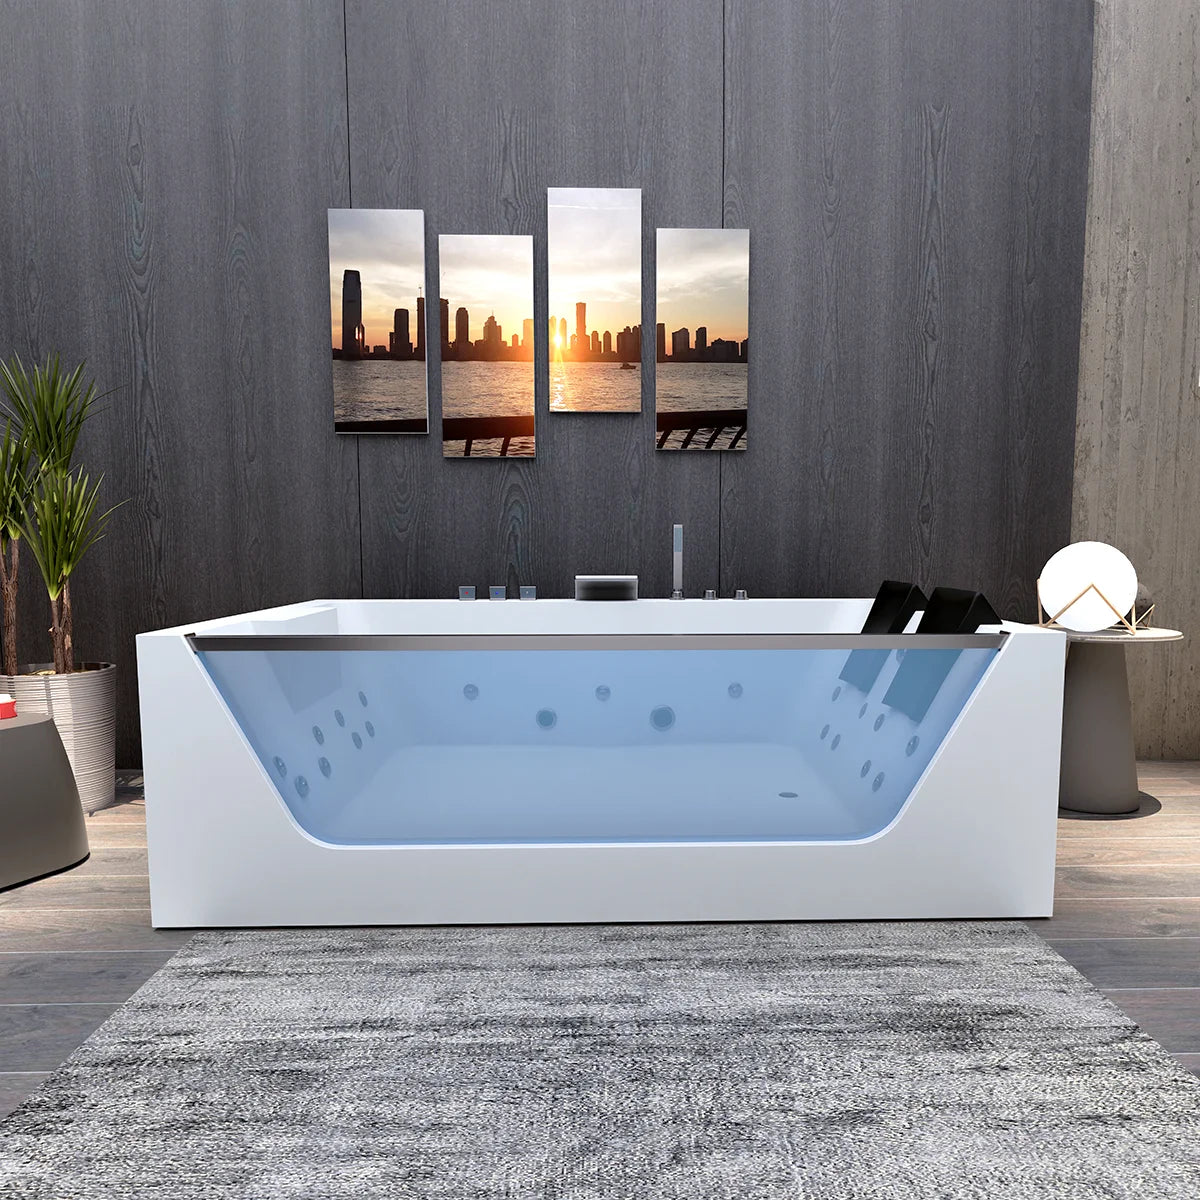 71 in. Freestanding Whirlpool Bathtub for 2 Person, with 19 Jets for Hydro-massage, Chromotherapy Lights & Tub Filler & Shower, 110v, Side Drain